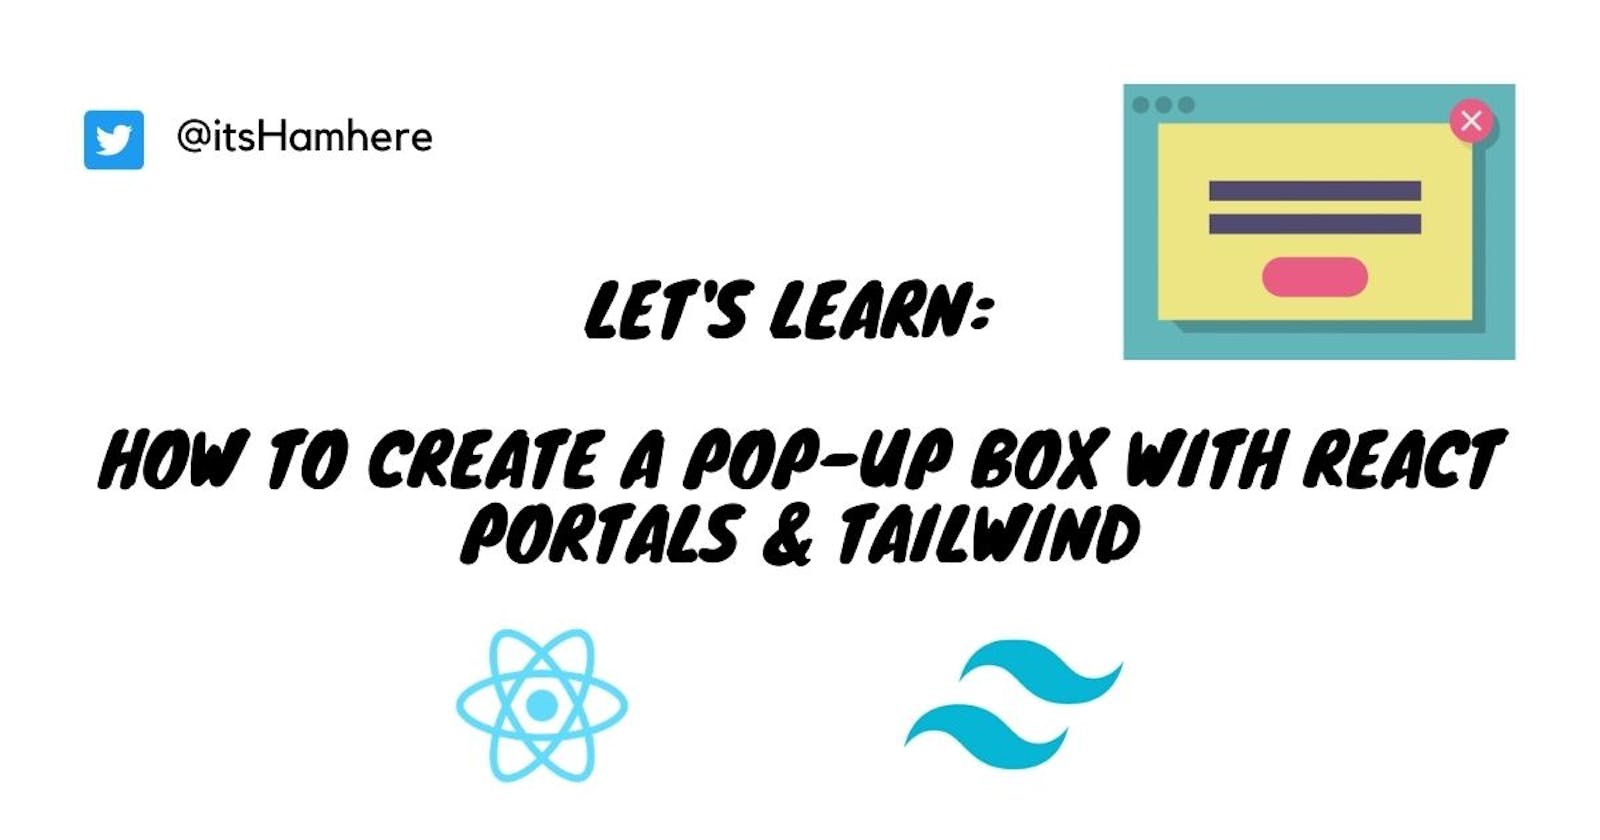 Let's learn: How to create a pop-up box with React Portals & Tailwind